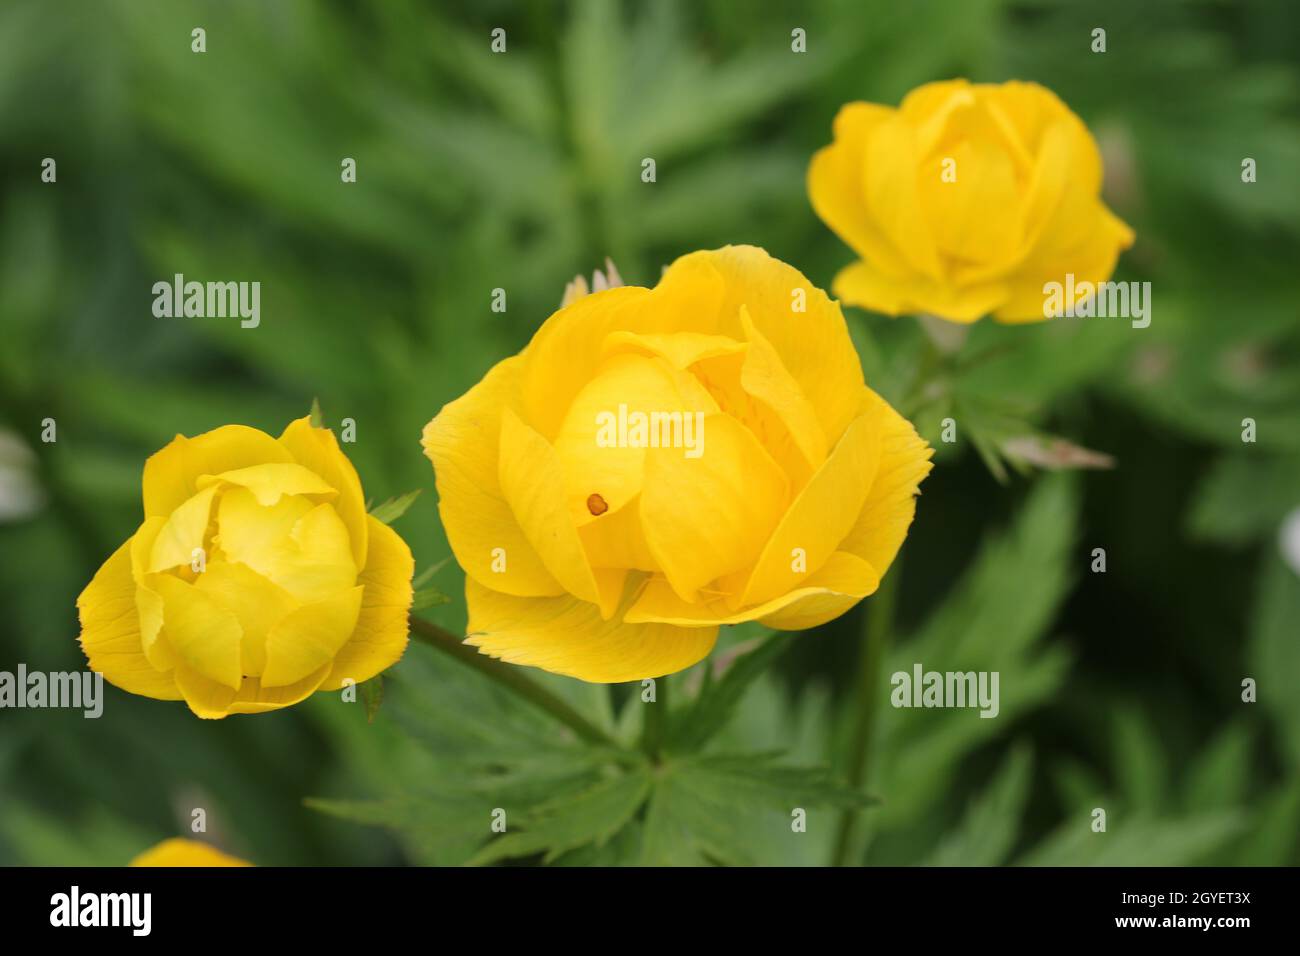 Yellow hybrid globeflower, Trollius x cultorum variety Bressingham Sunshine, flowers in close up with a background of blurred leaves and flowers. Stock Photo